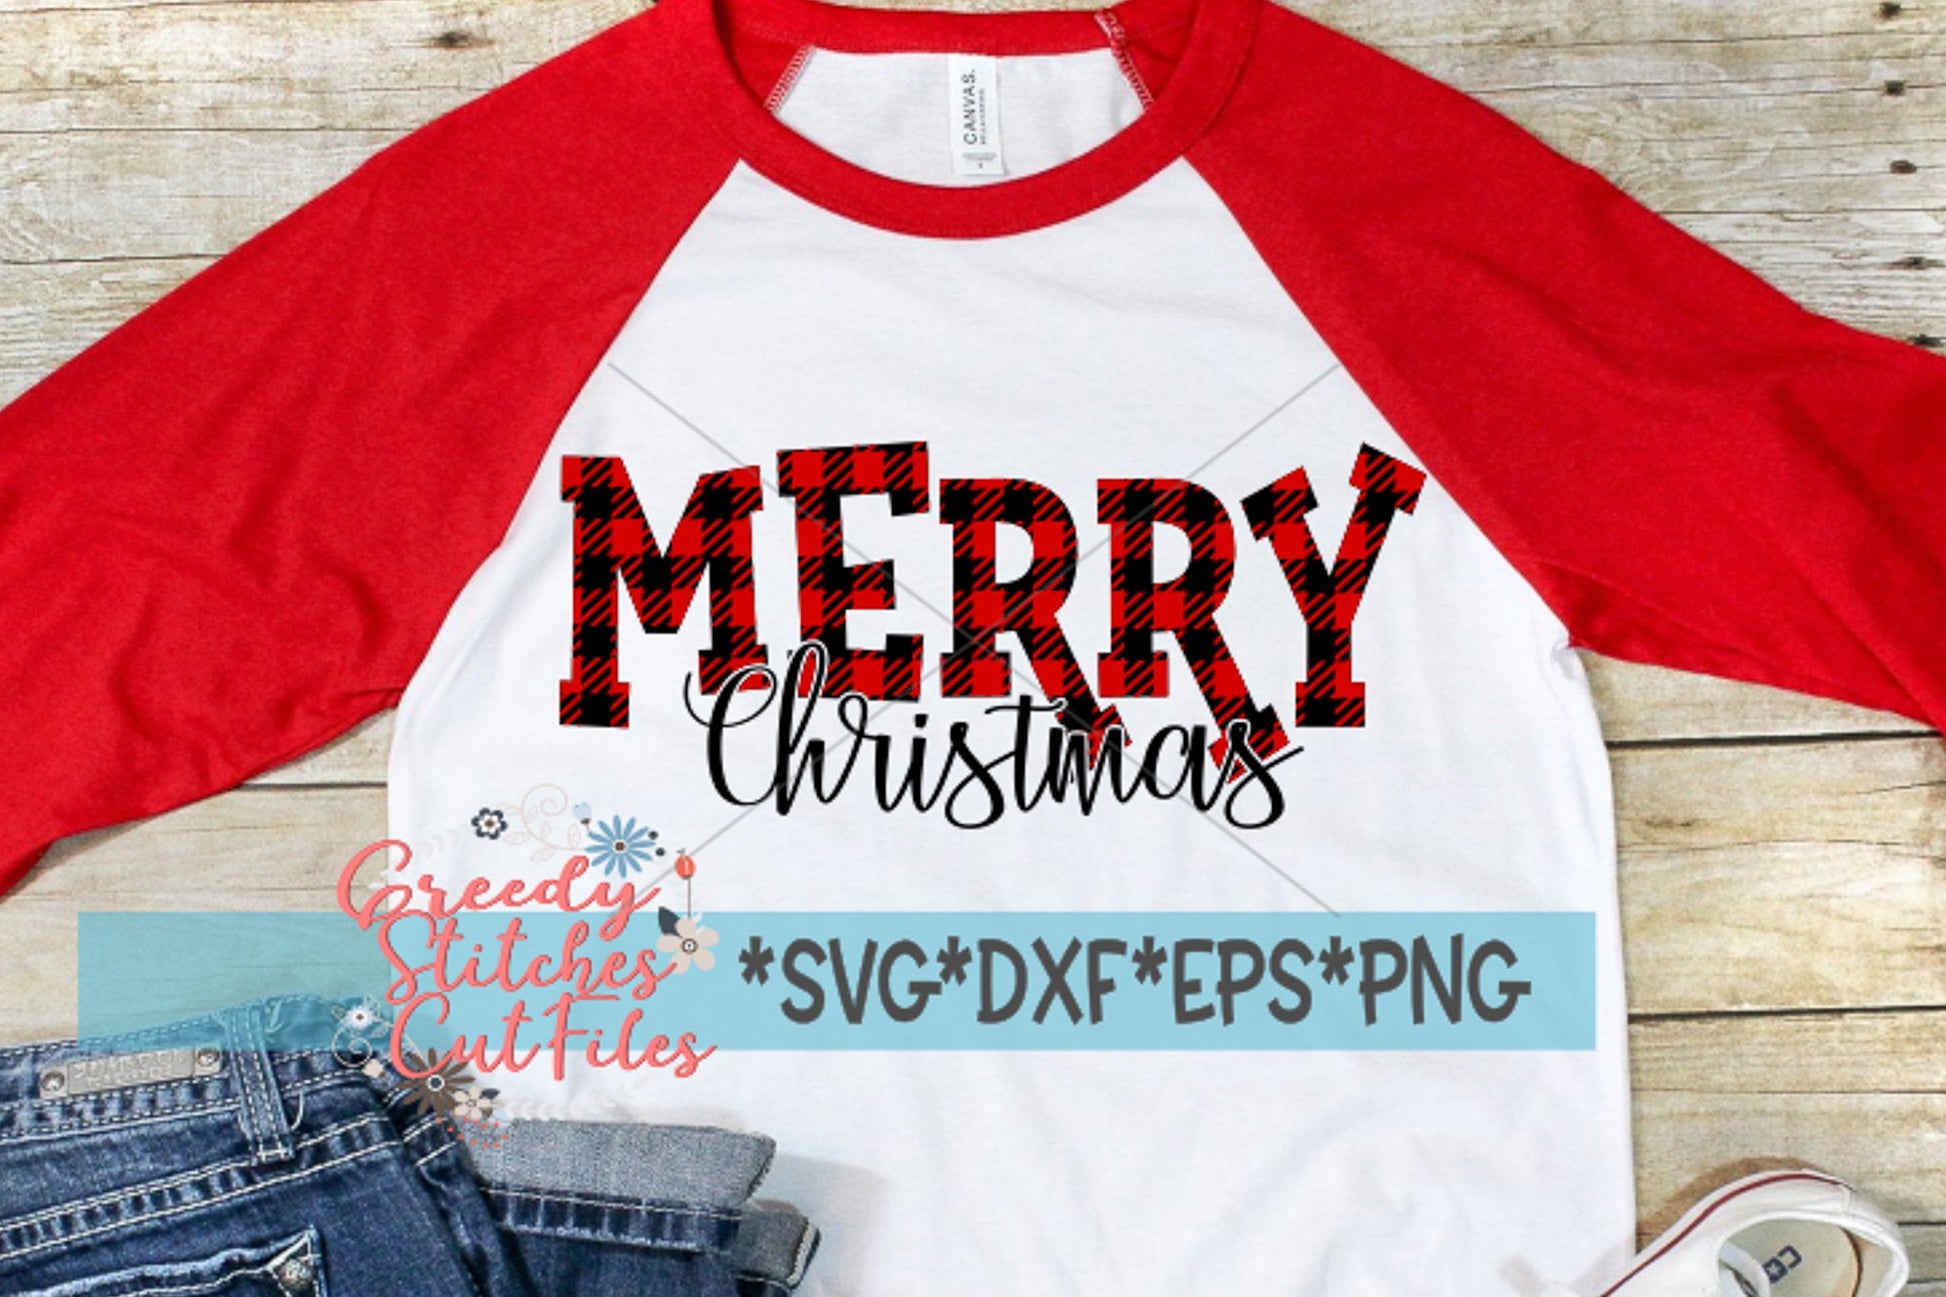 Merry Christmas Buffalo Plaid svg dxf eps png. Christmas SvG | Merry SvG | Merry Christmas DxF | Plaid SvG |Instant Download Cut Files